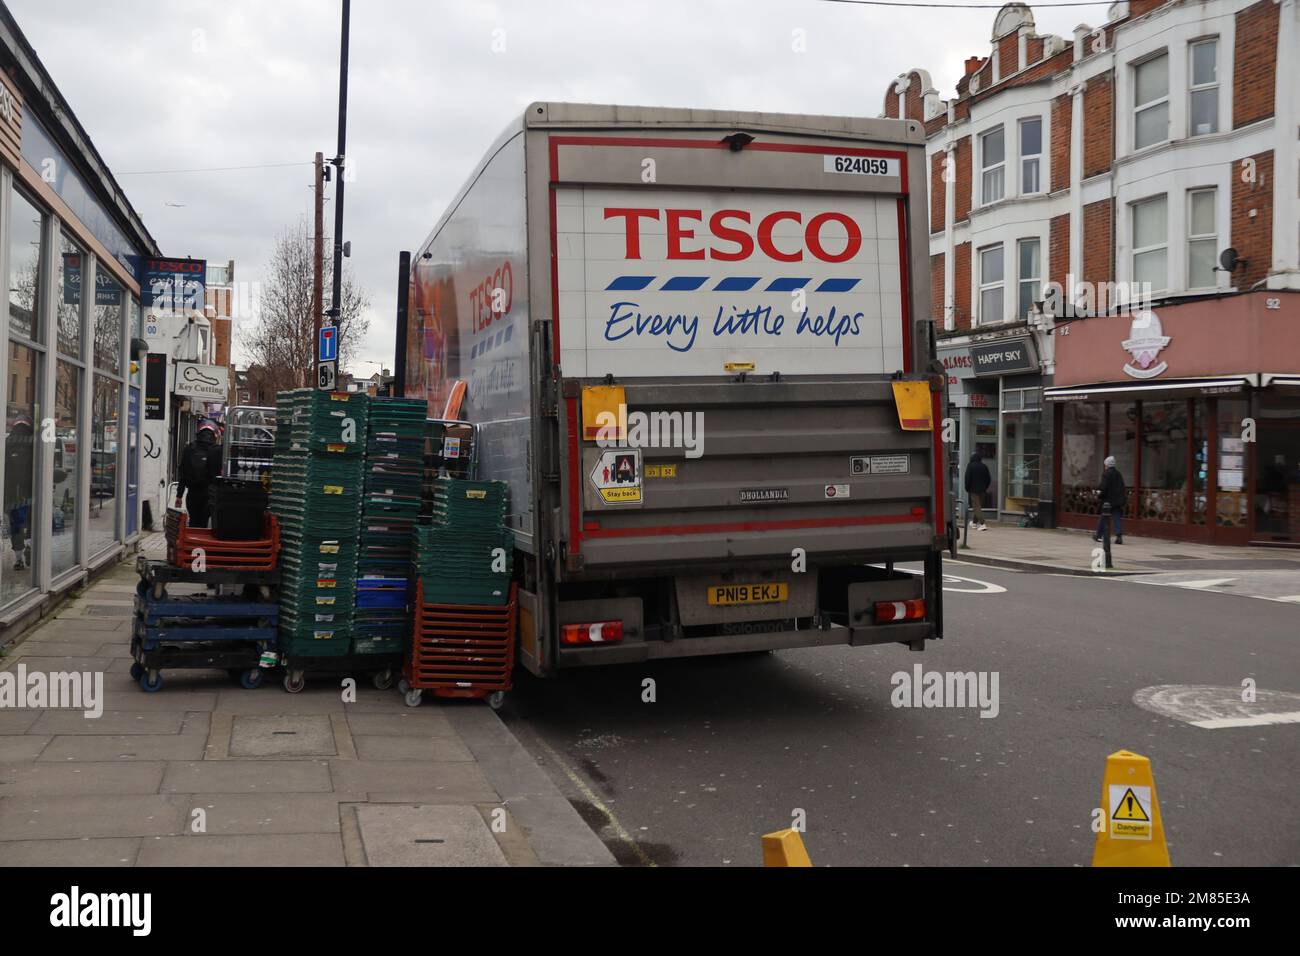 LONDON, UK - Jan, 11, 2023: Tesco delivery truck parked on street. Stock Photo